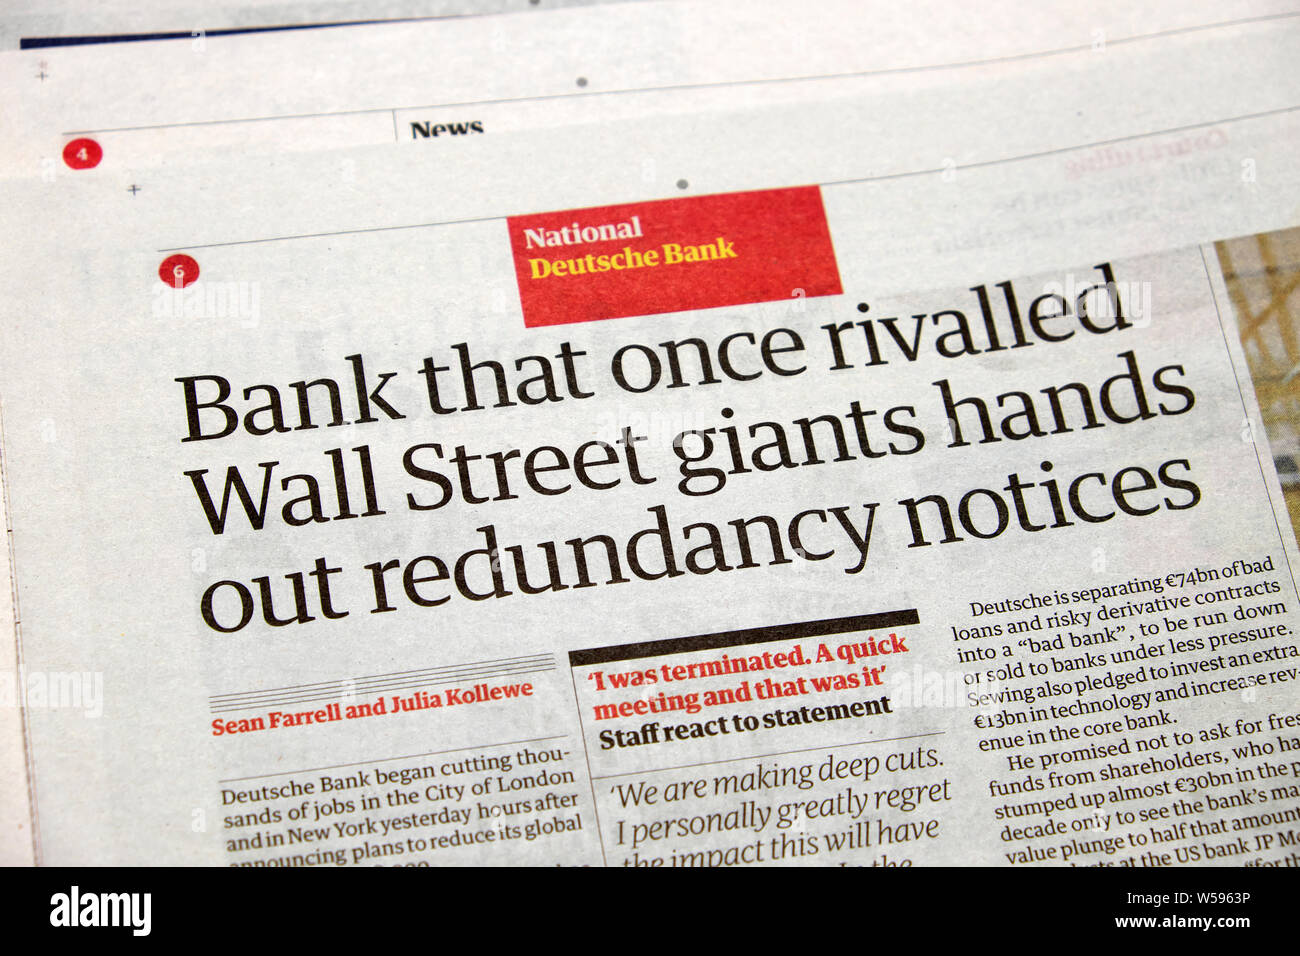 'Bank that once rivalled Wall Street giants hands out redundancy notices' Deutsche bank Guardian newspaper article in paper July 2019 London UK Stock Photo